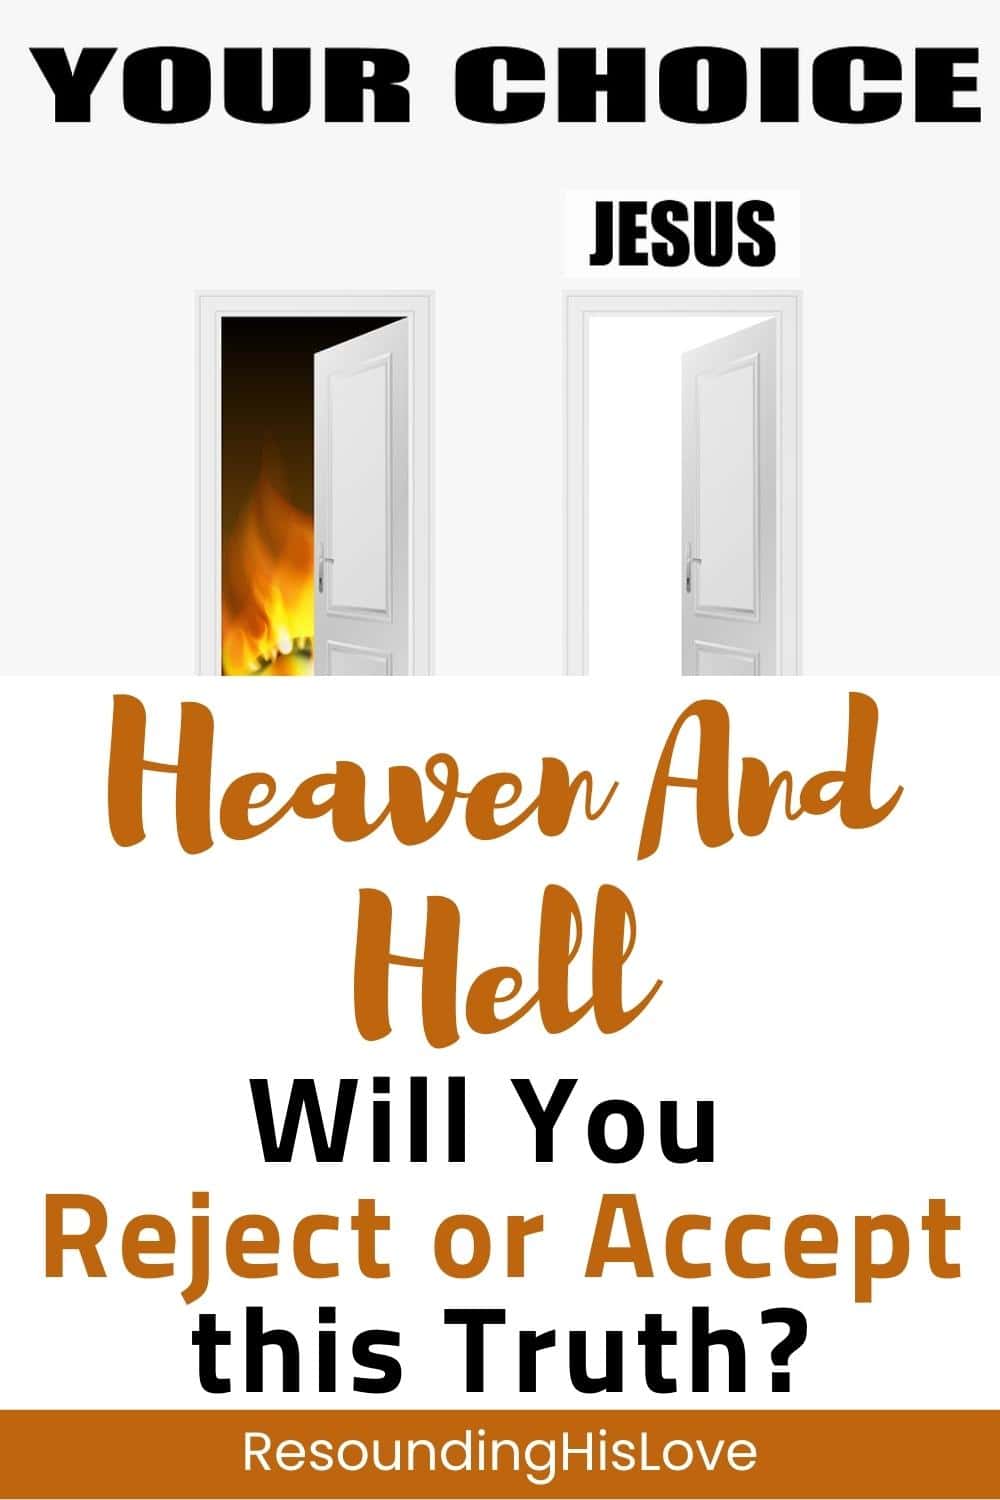 Heaven And Hell Will You Reject or Accept this Truth?